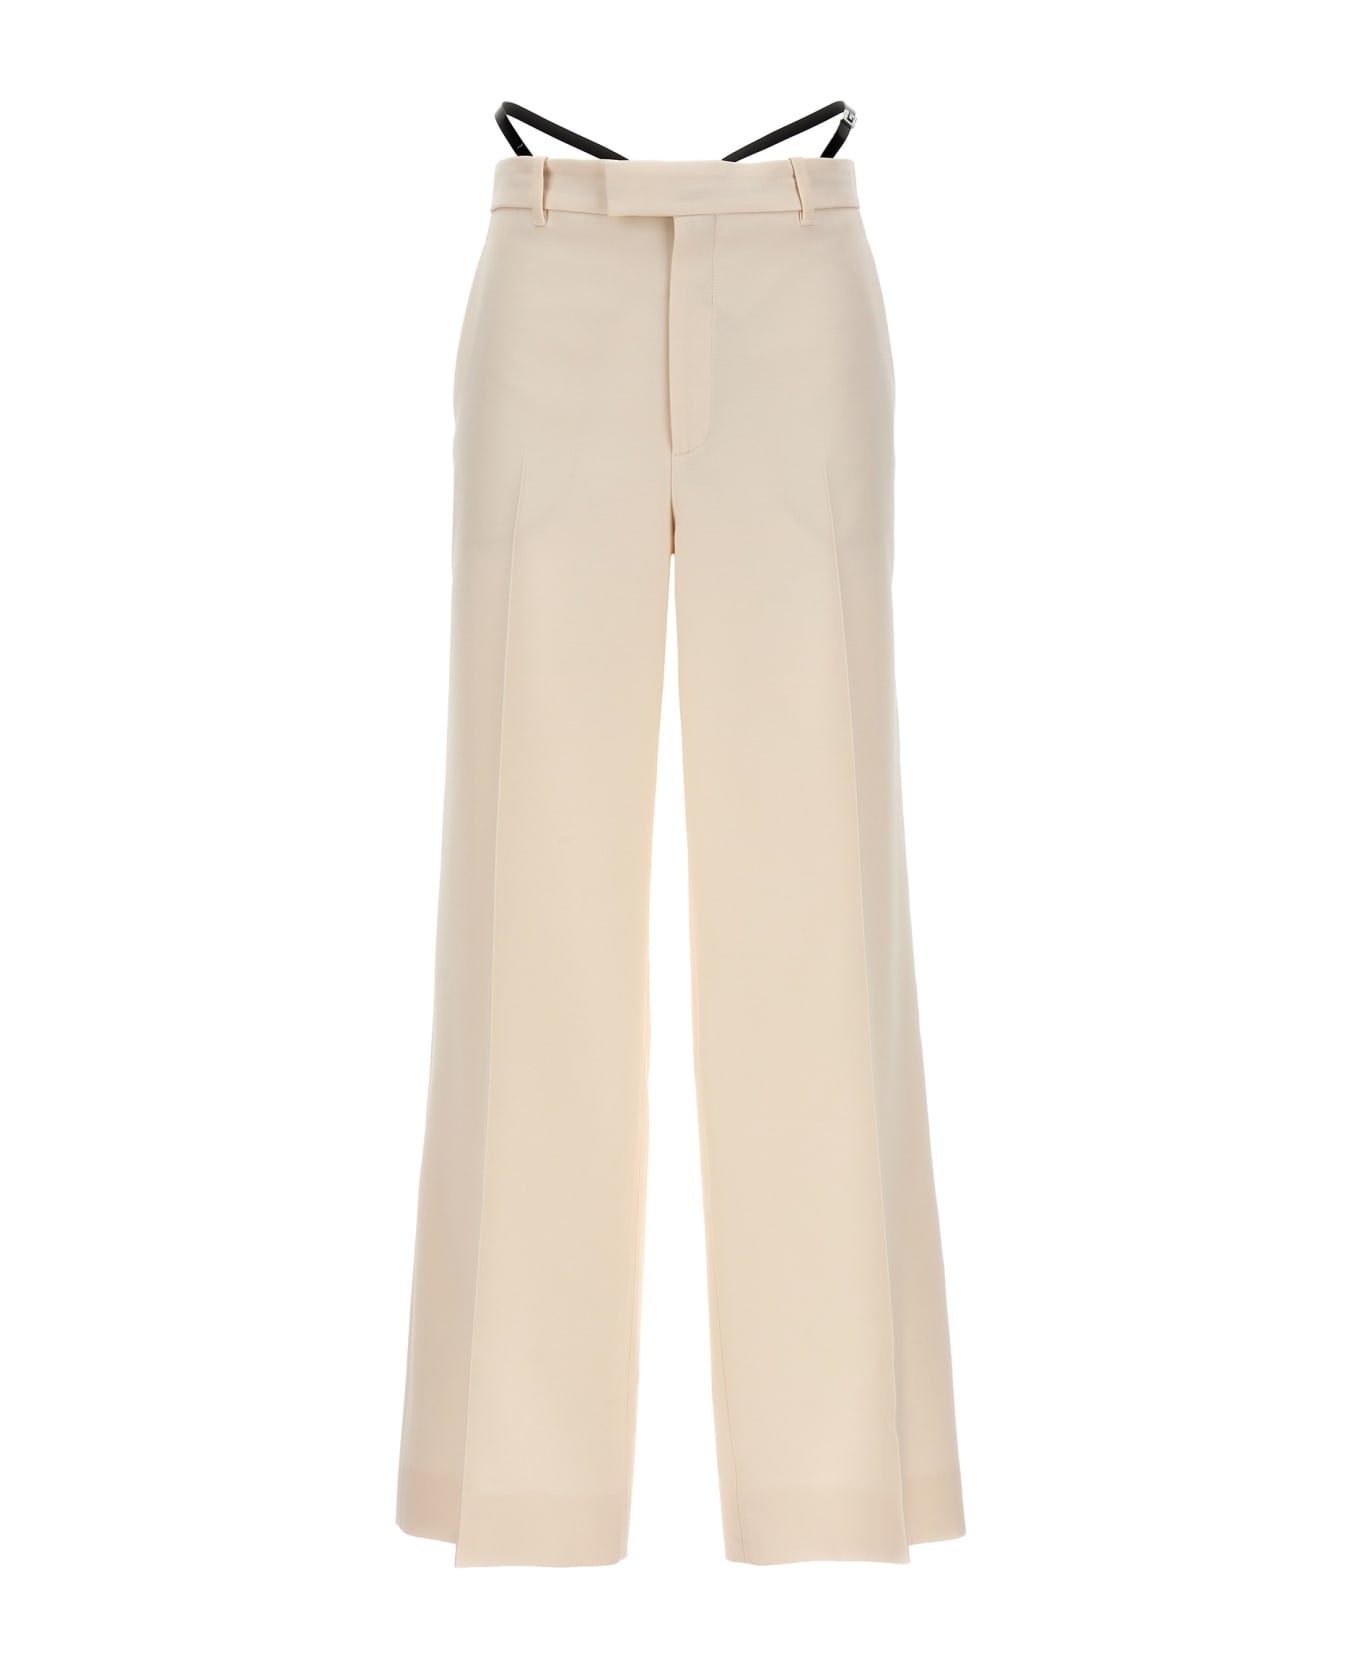 Gucci Cady Trousers - White